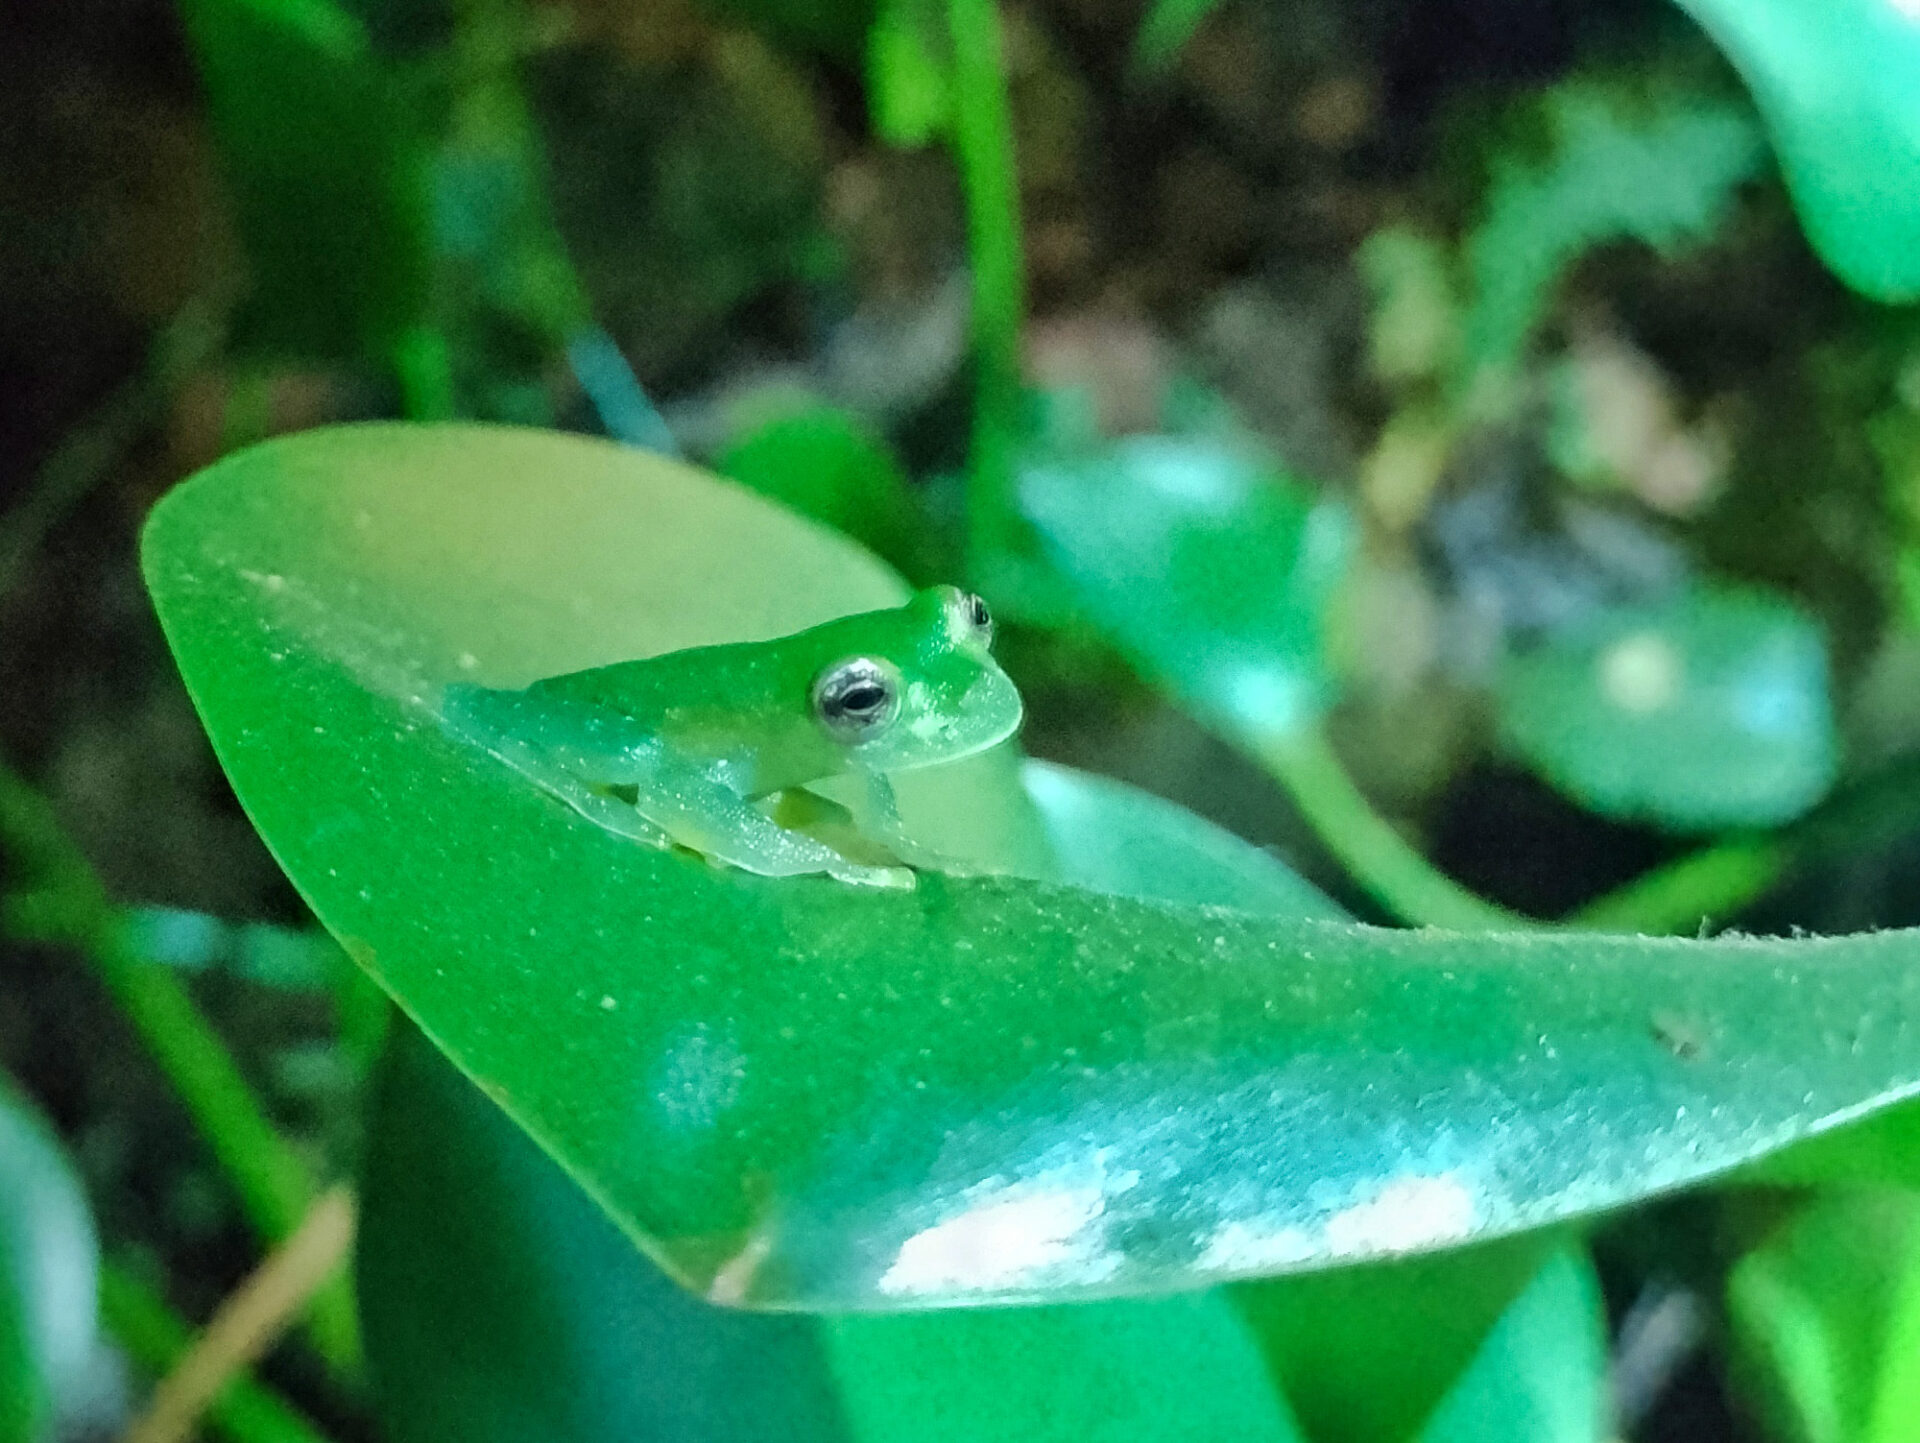 Yellow-spotted Glassfrog, Costa Rica